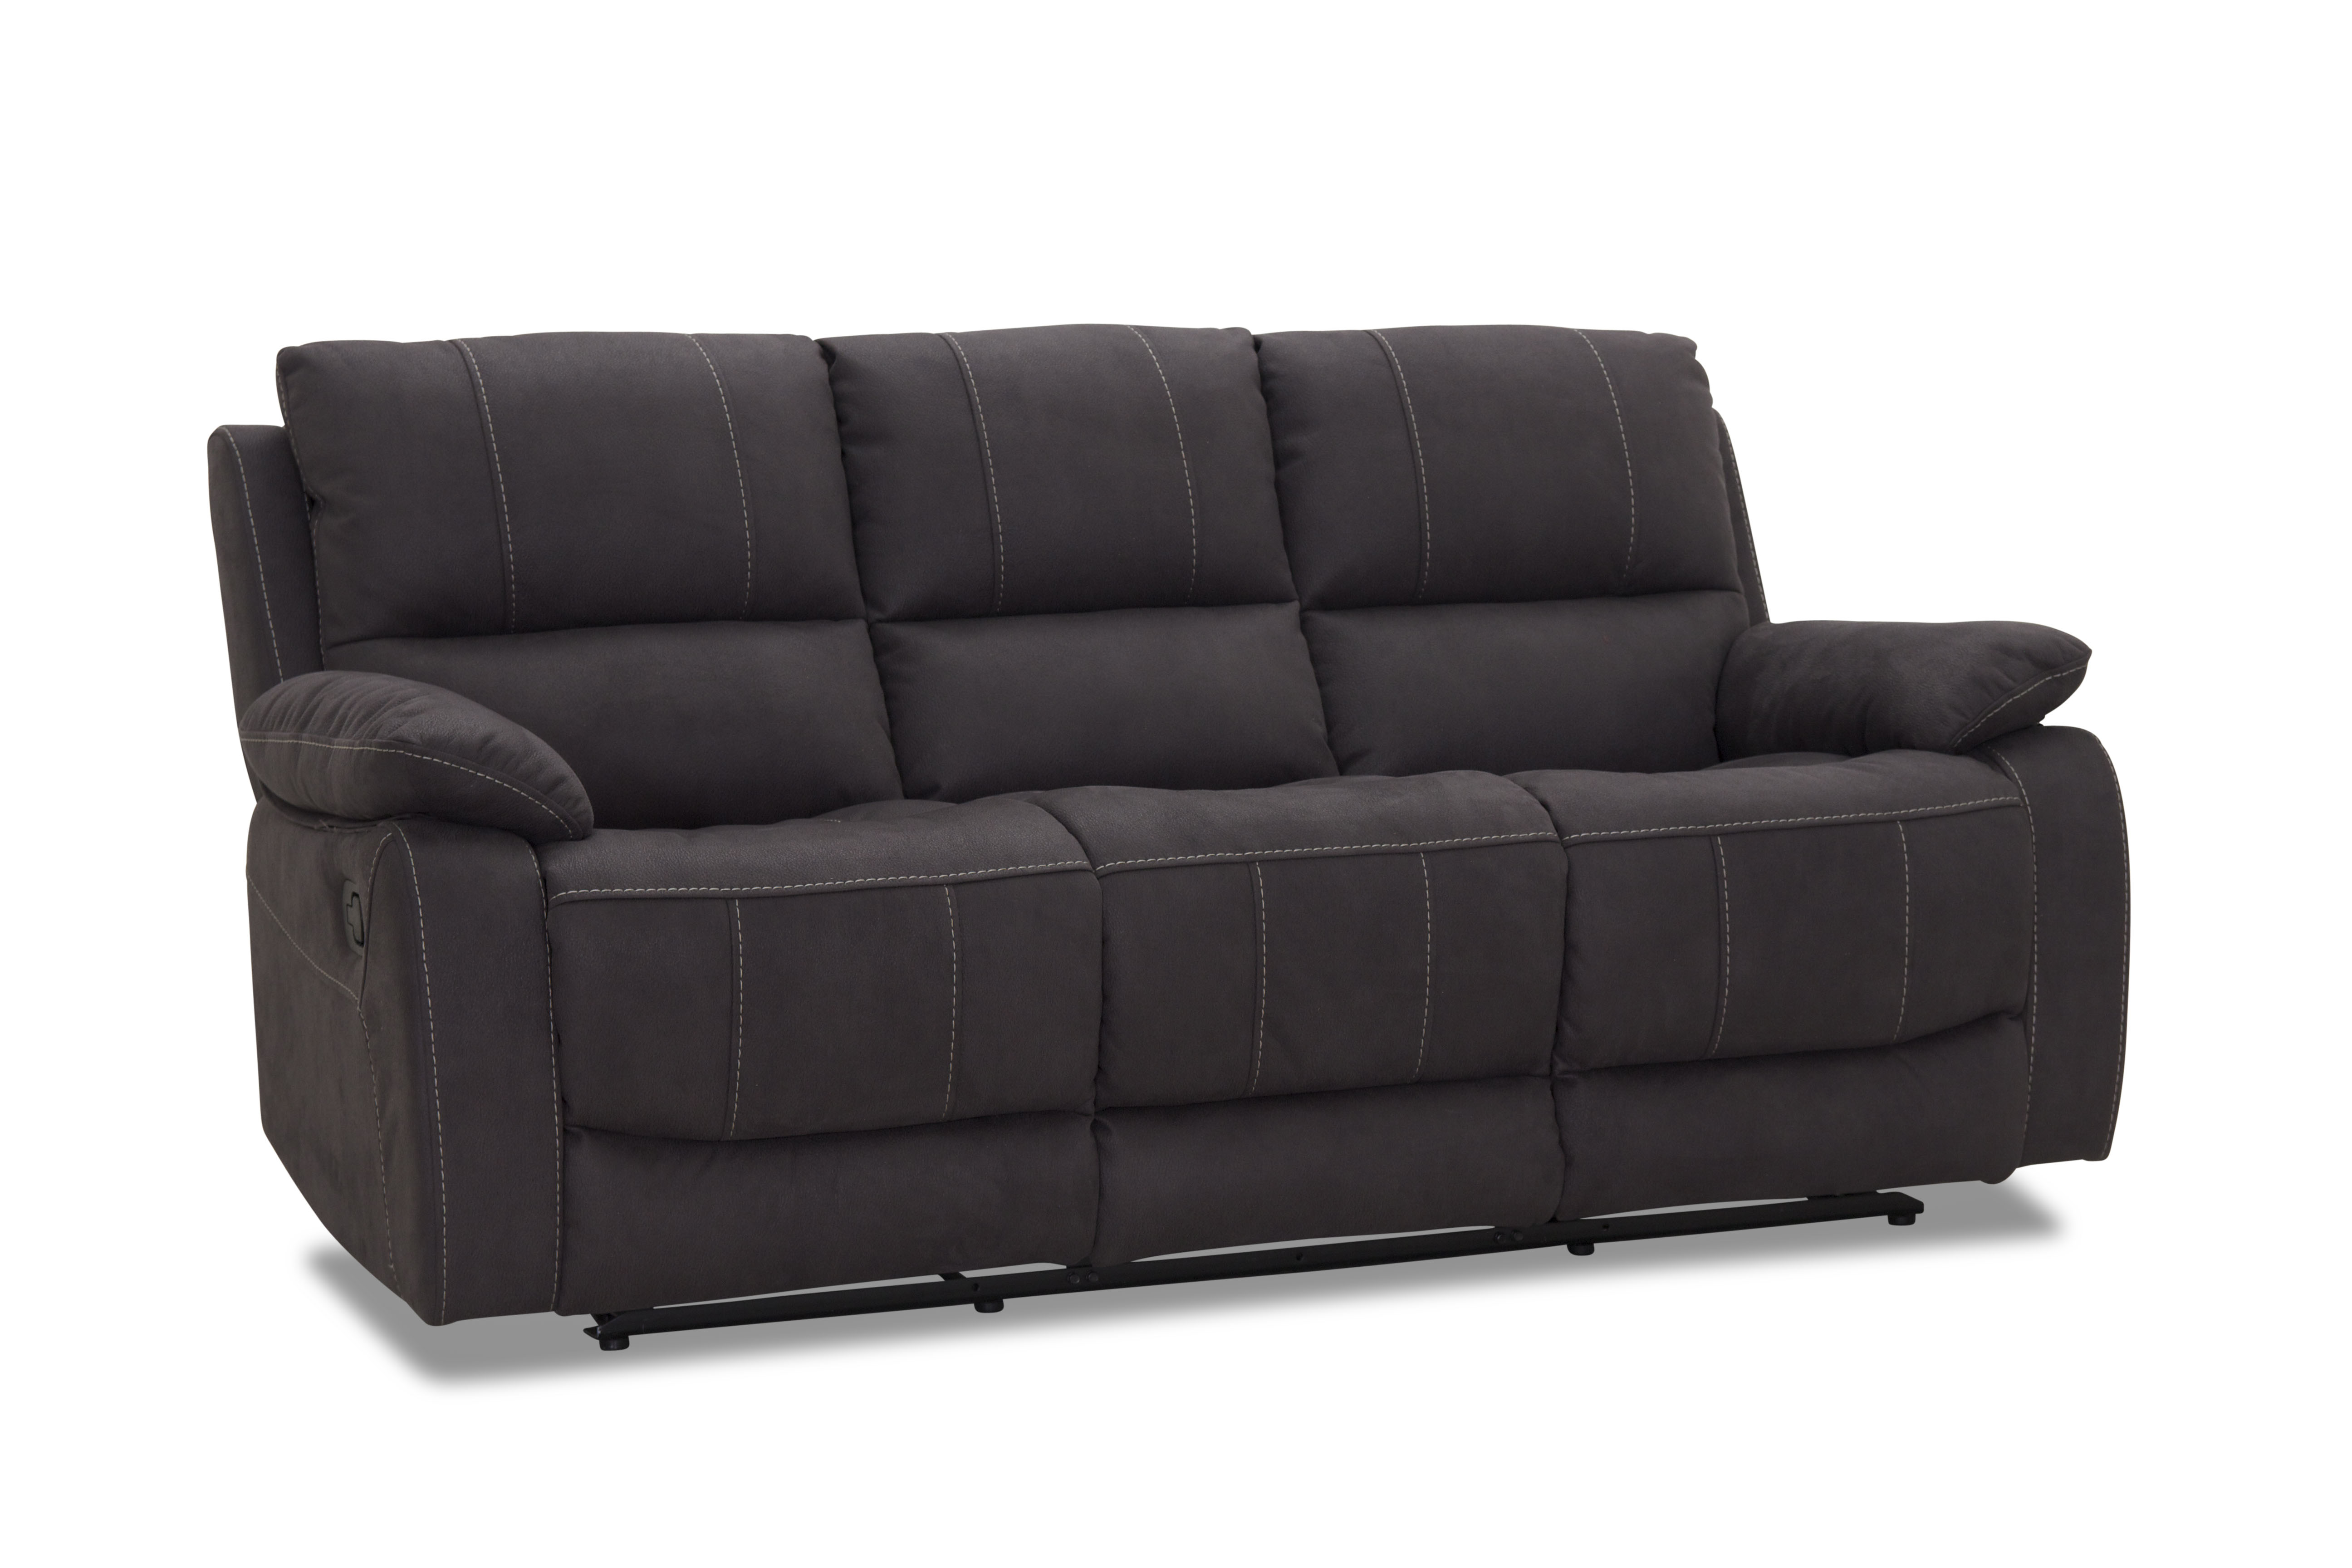 Texas 3-sits gr med recliner i gruppen Soffor / Reclinersoffa hos HolyHome (247391100)